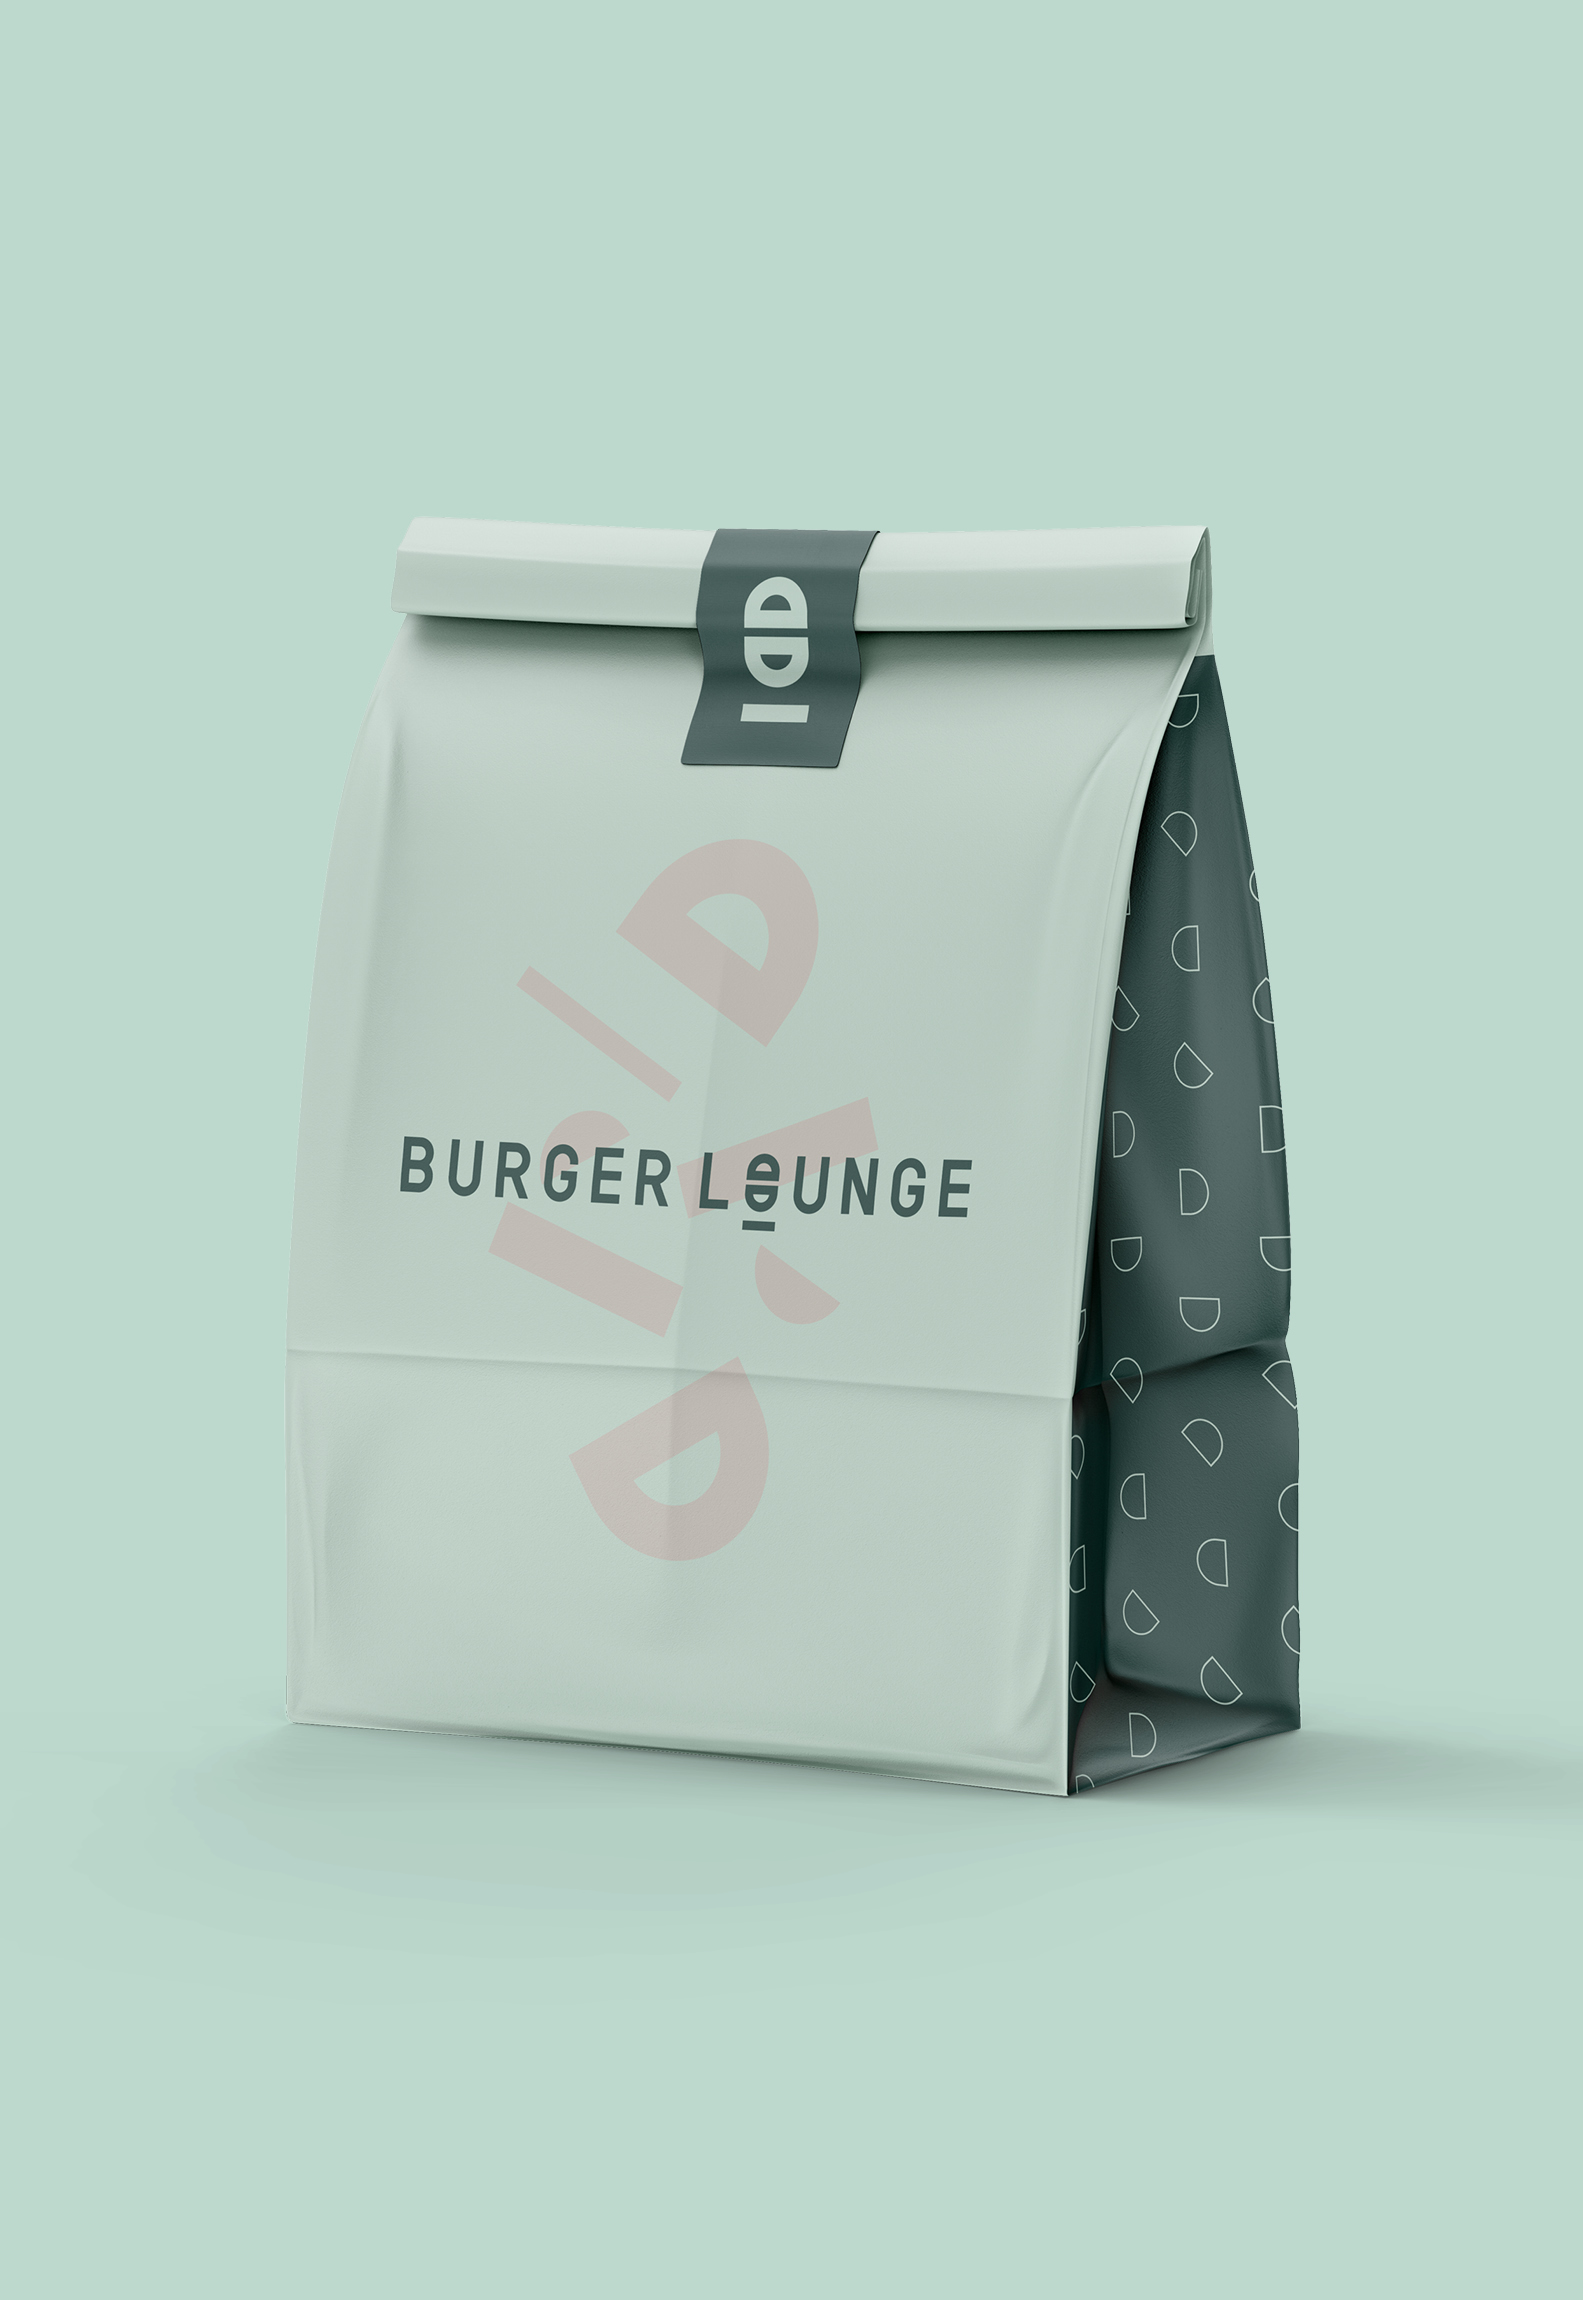 Burger-Lounge-Brand-Facelift-By-Millimeter-Creative-Agency23